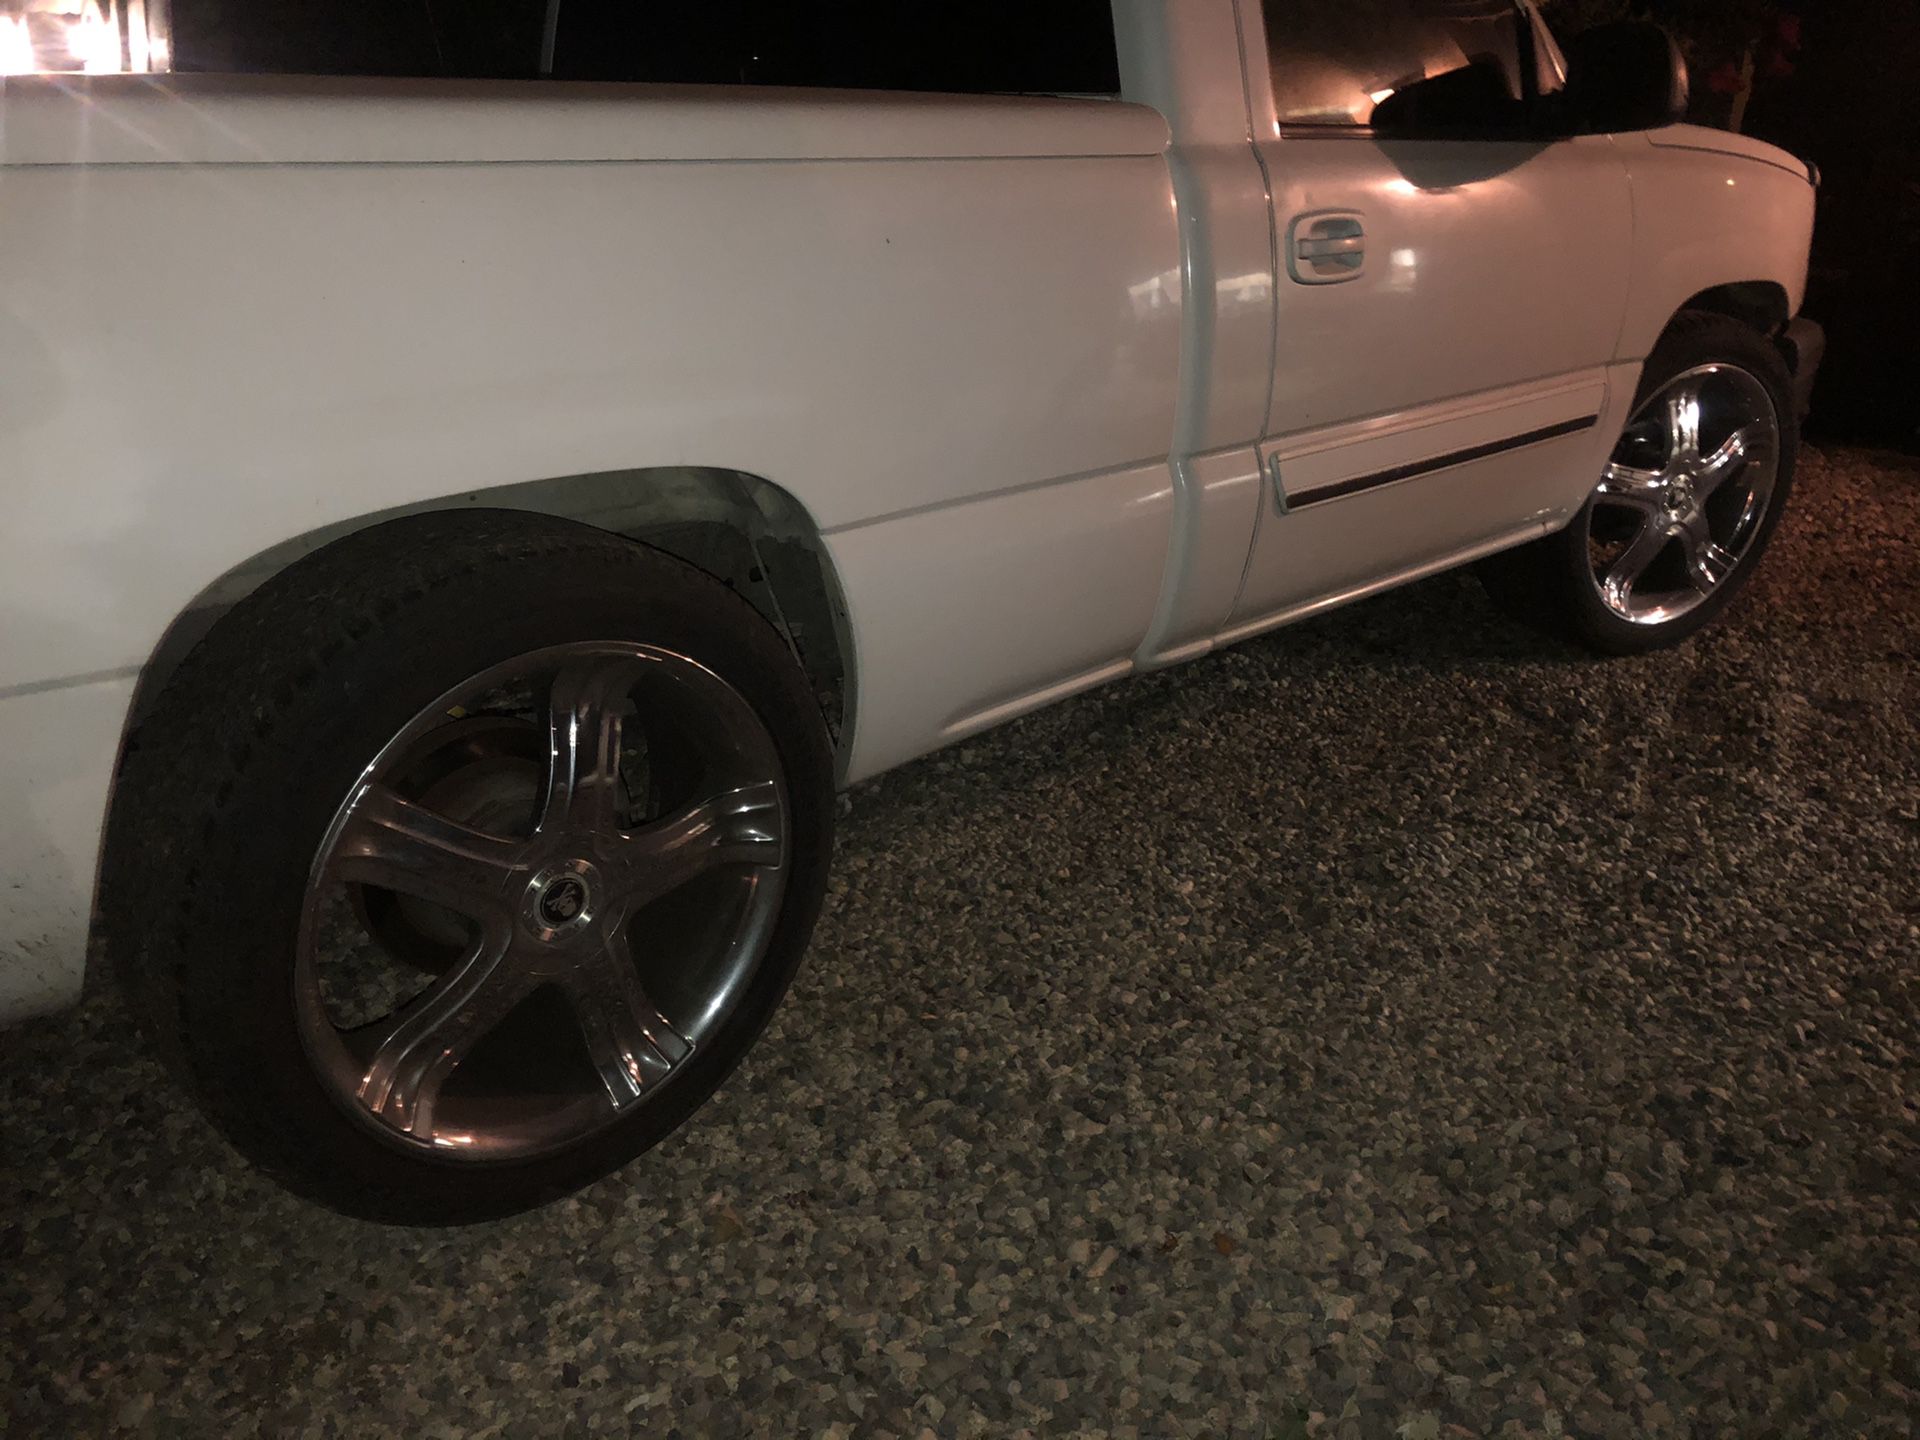 23 inch rims with a 3 week old set of general grabber tires practically brand new